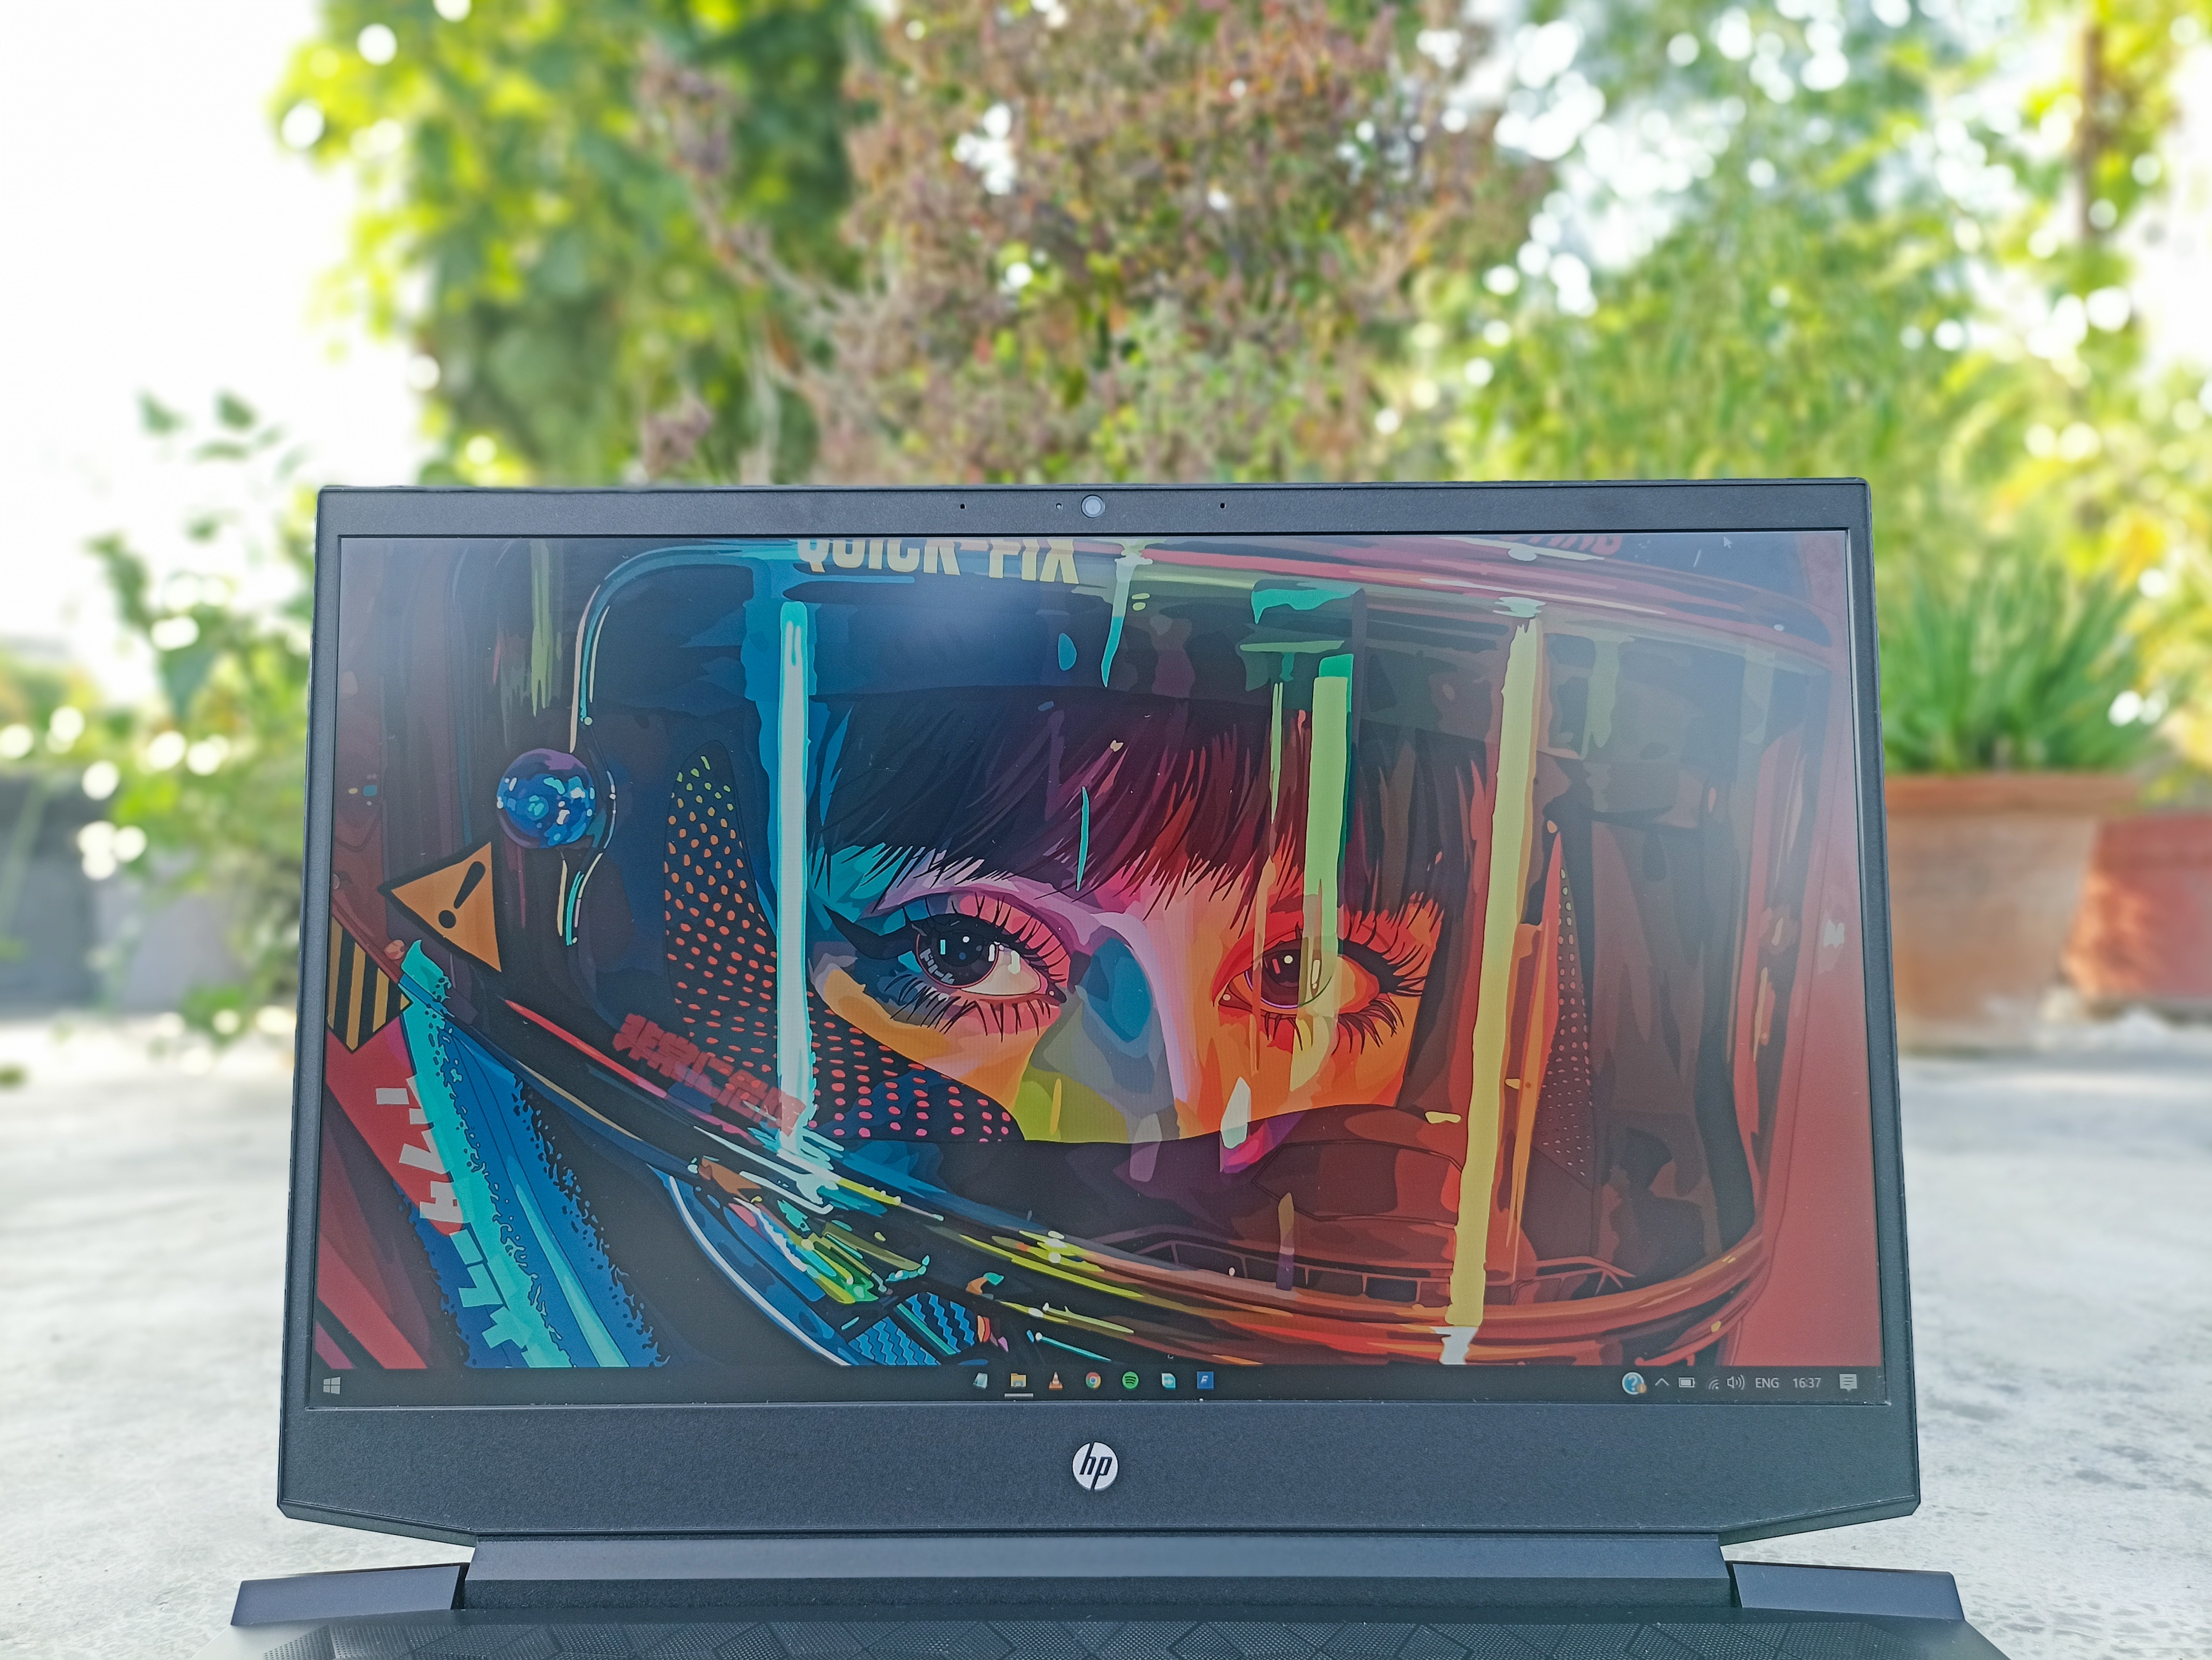 HP Pavilion Gaming 16 Review, Pros and Cons